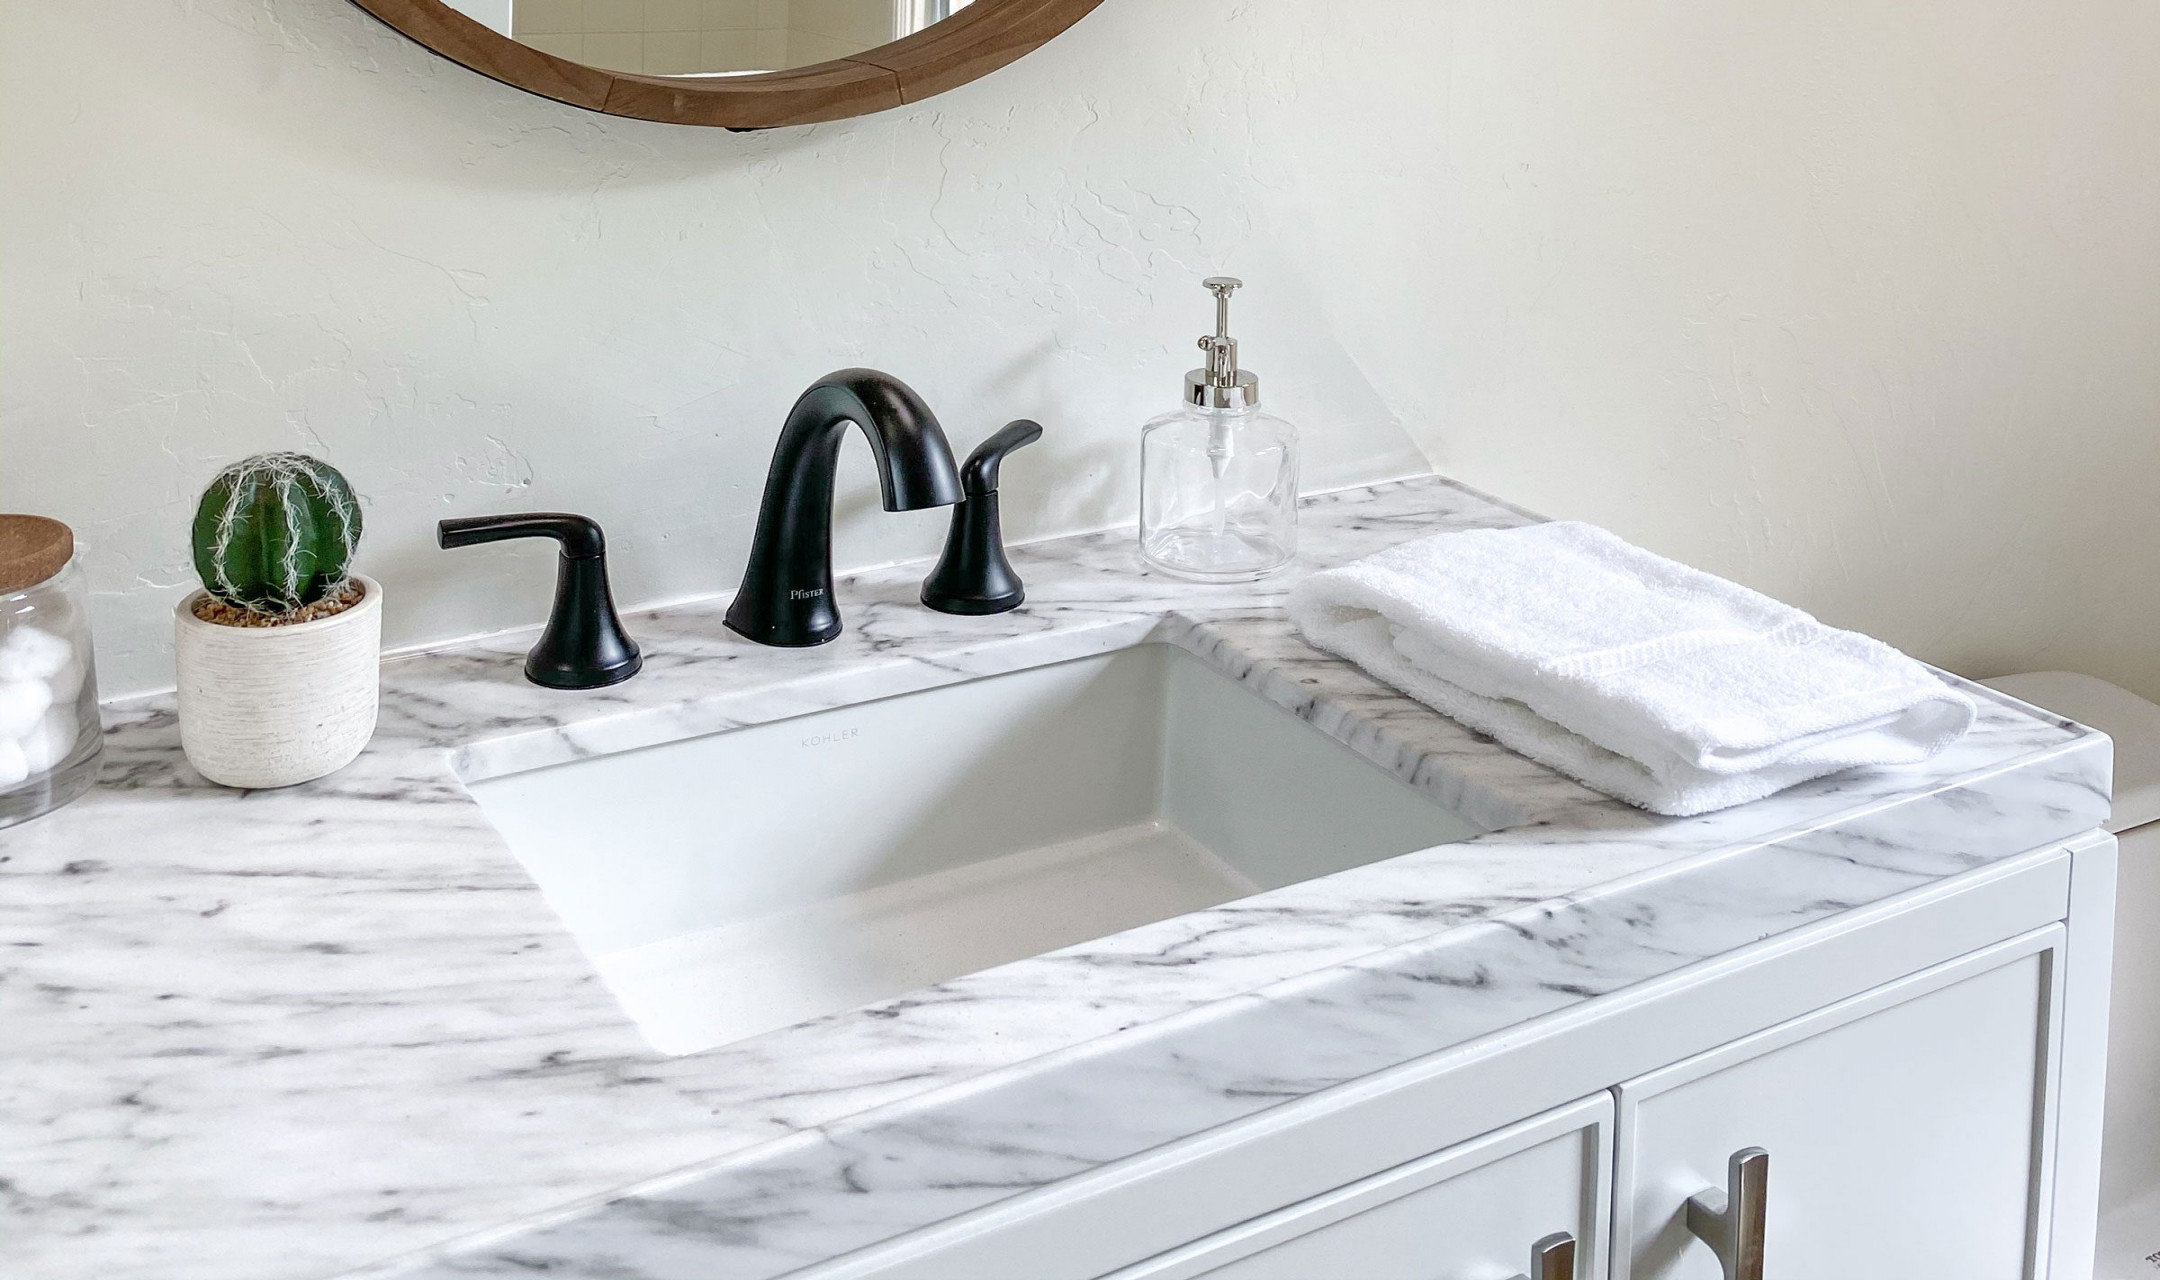 How To Choose the Right Bathroom Countertop (According to Our Experts)